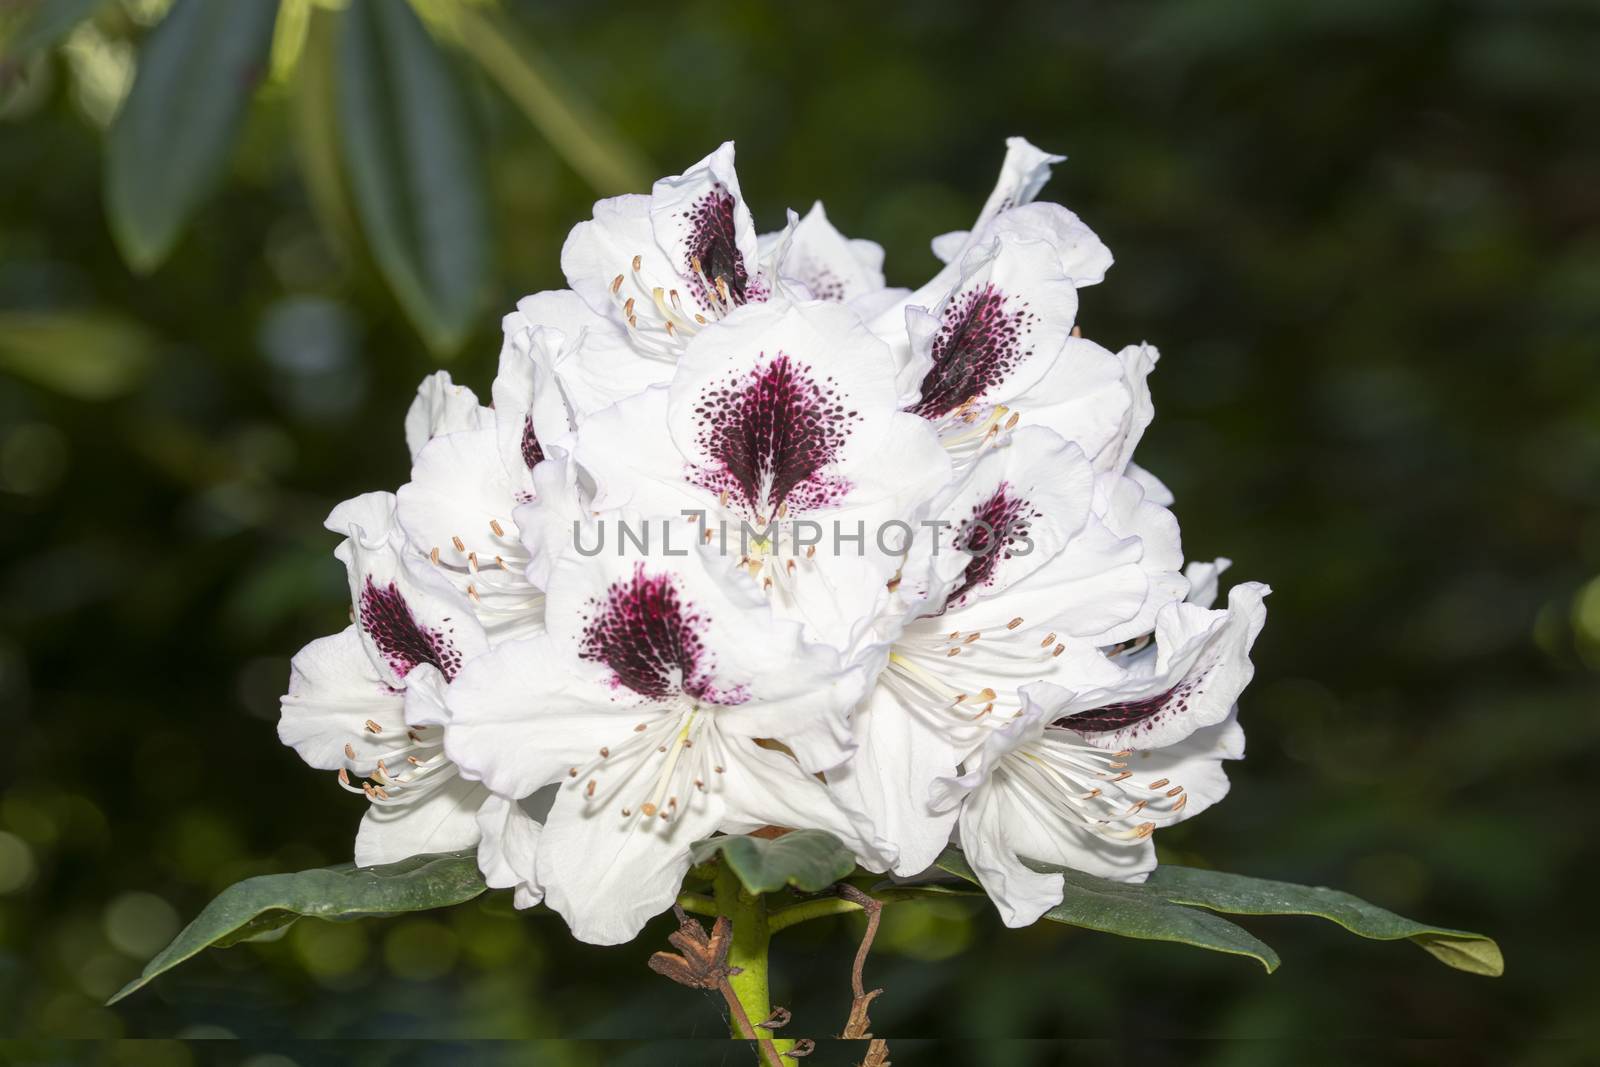 White and deep purple color rhododendron flower blossom under a bright spring day lights